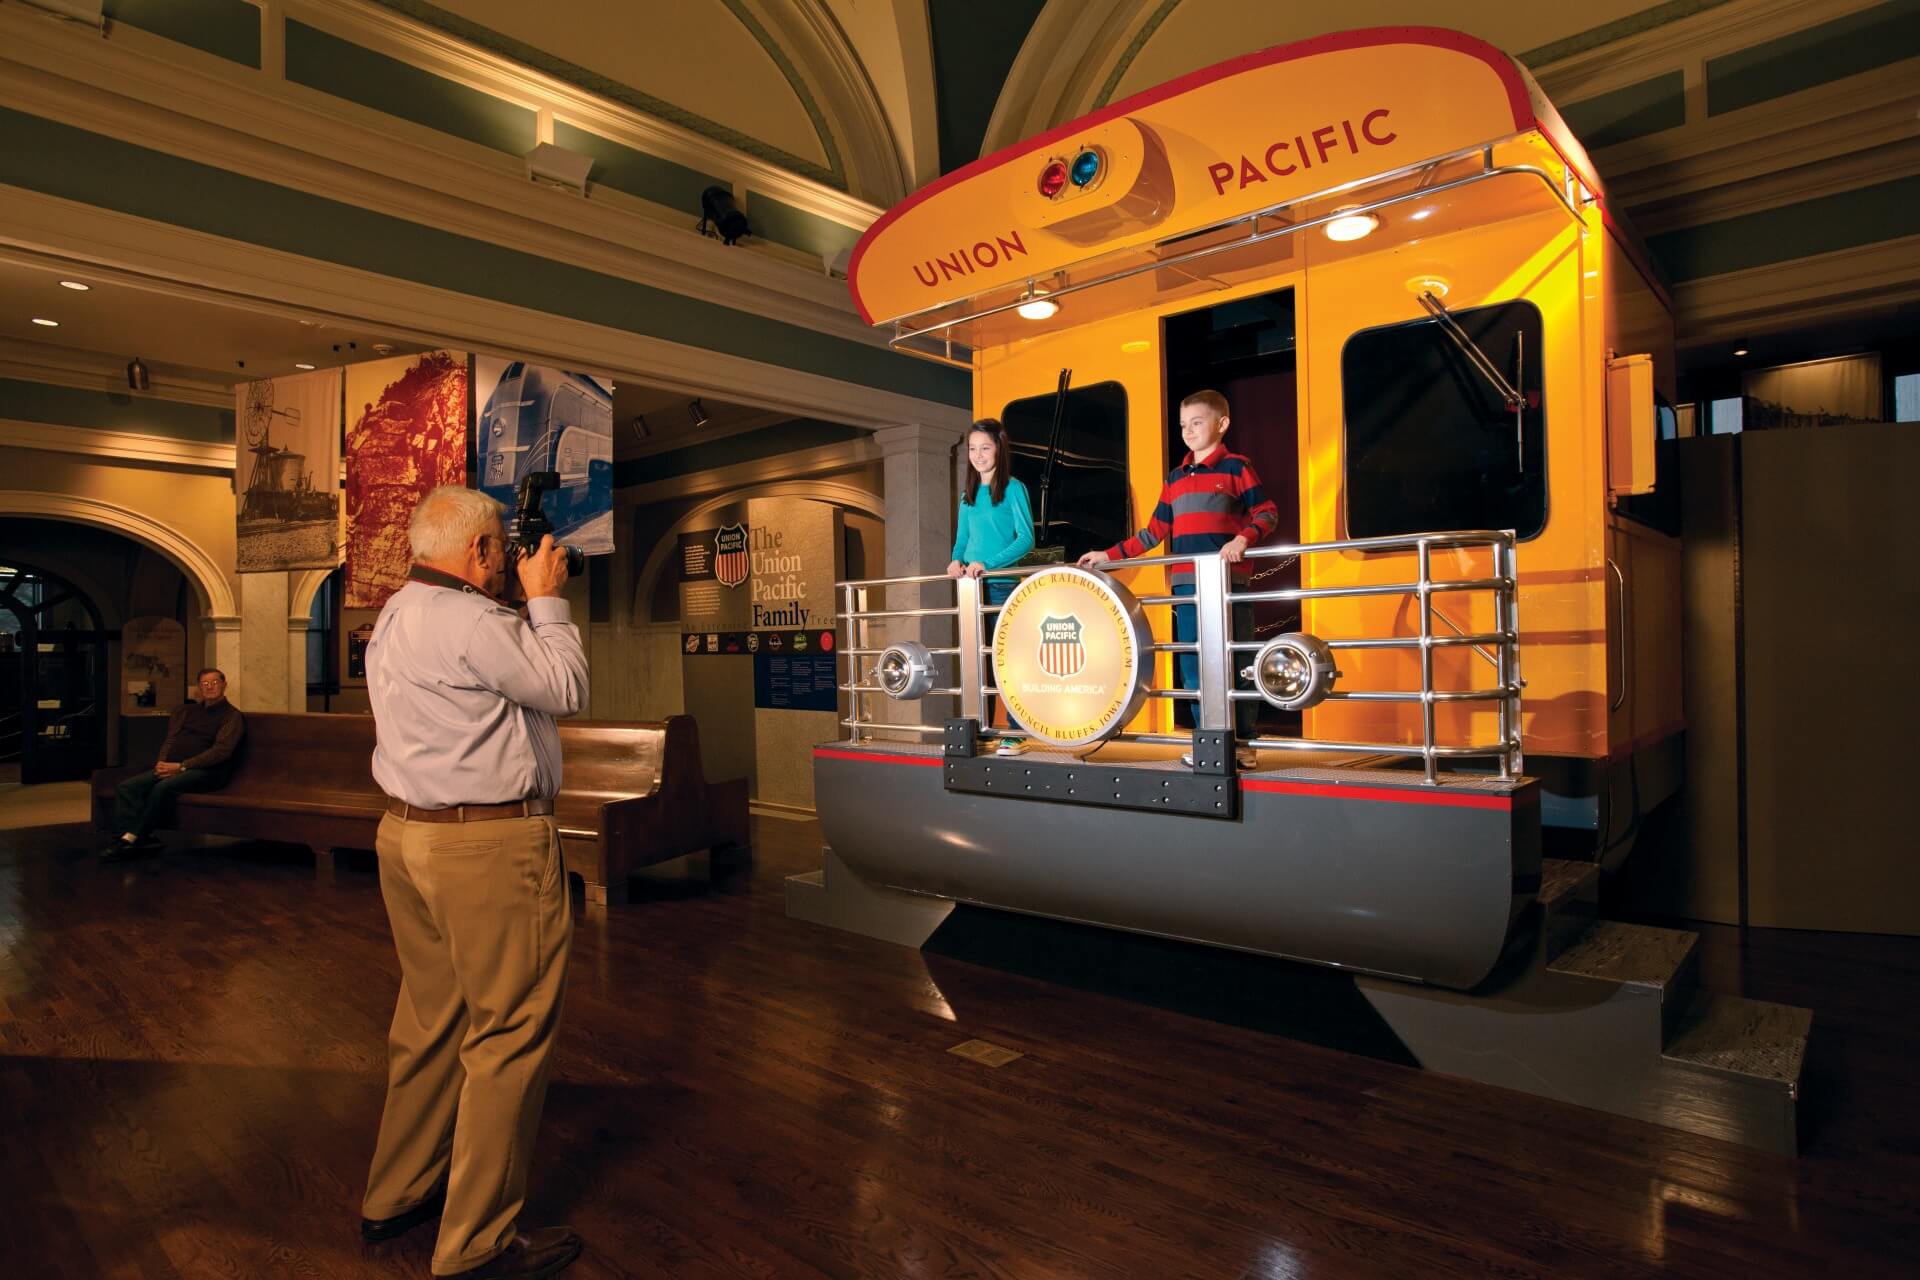 Man taking a photo of two kids on the back of a Union Pacific train car